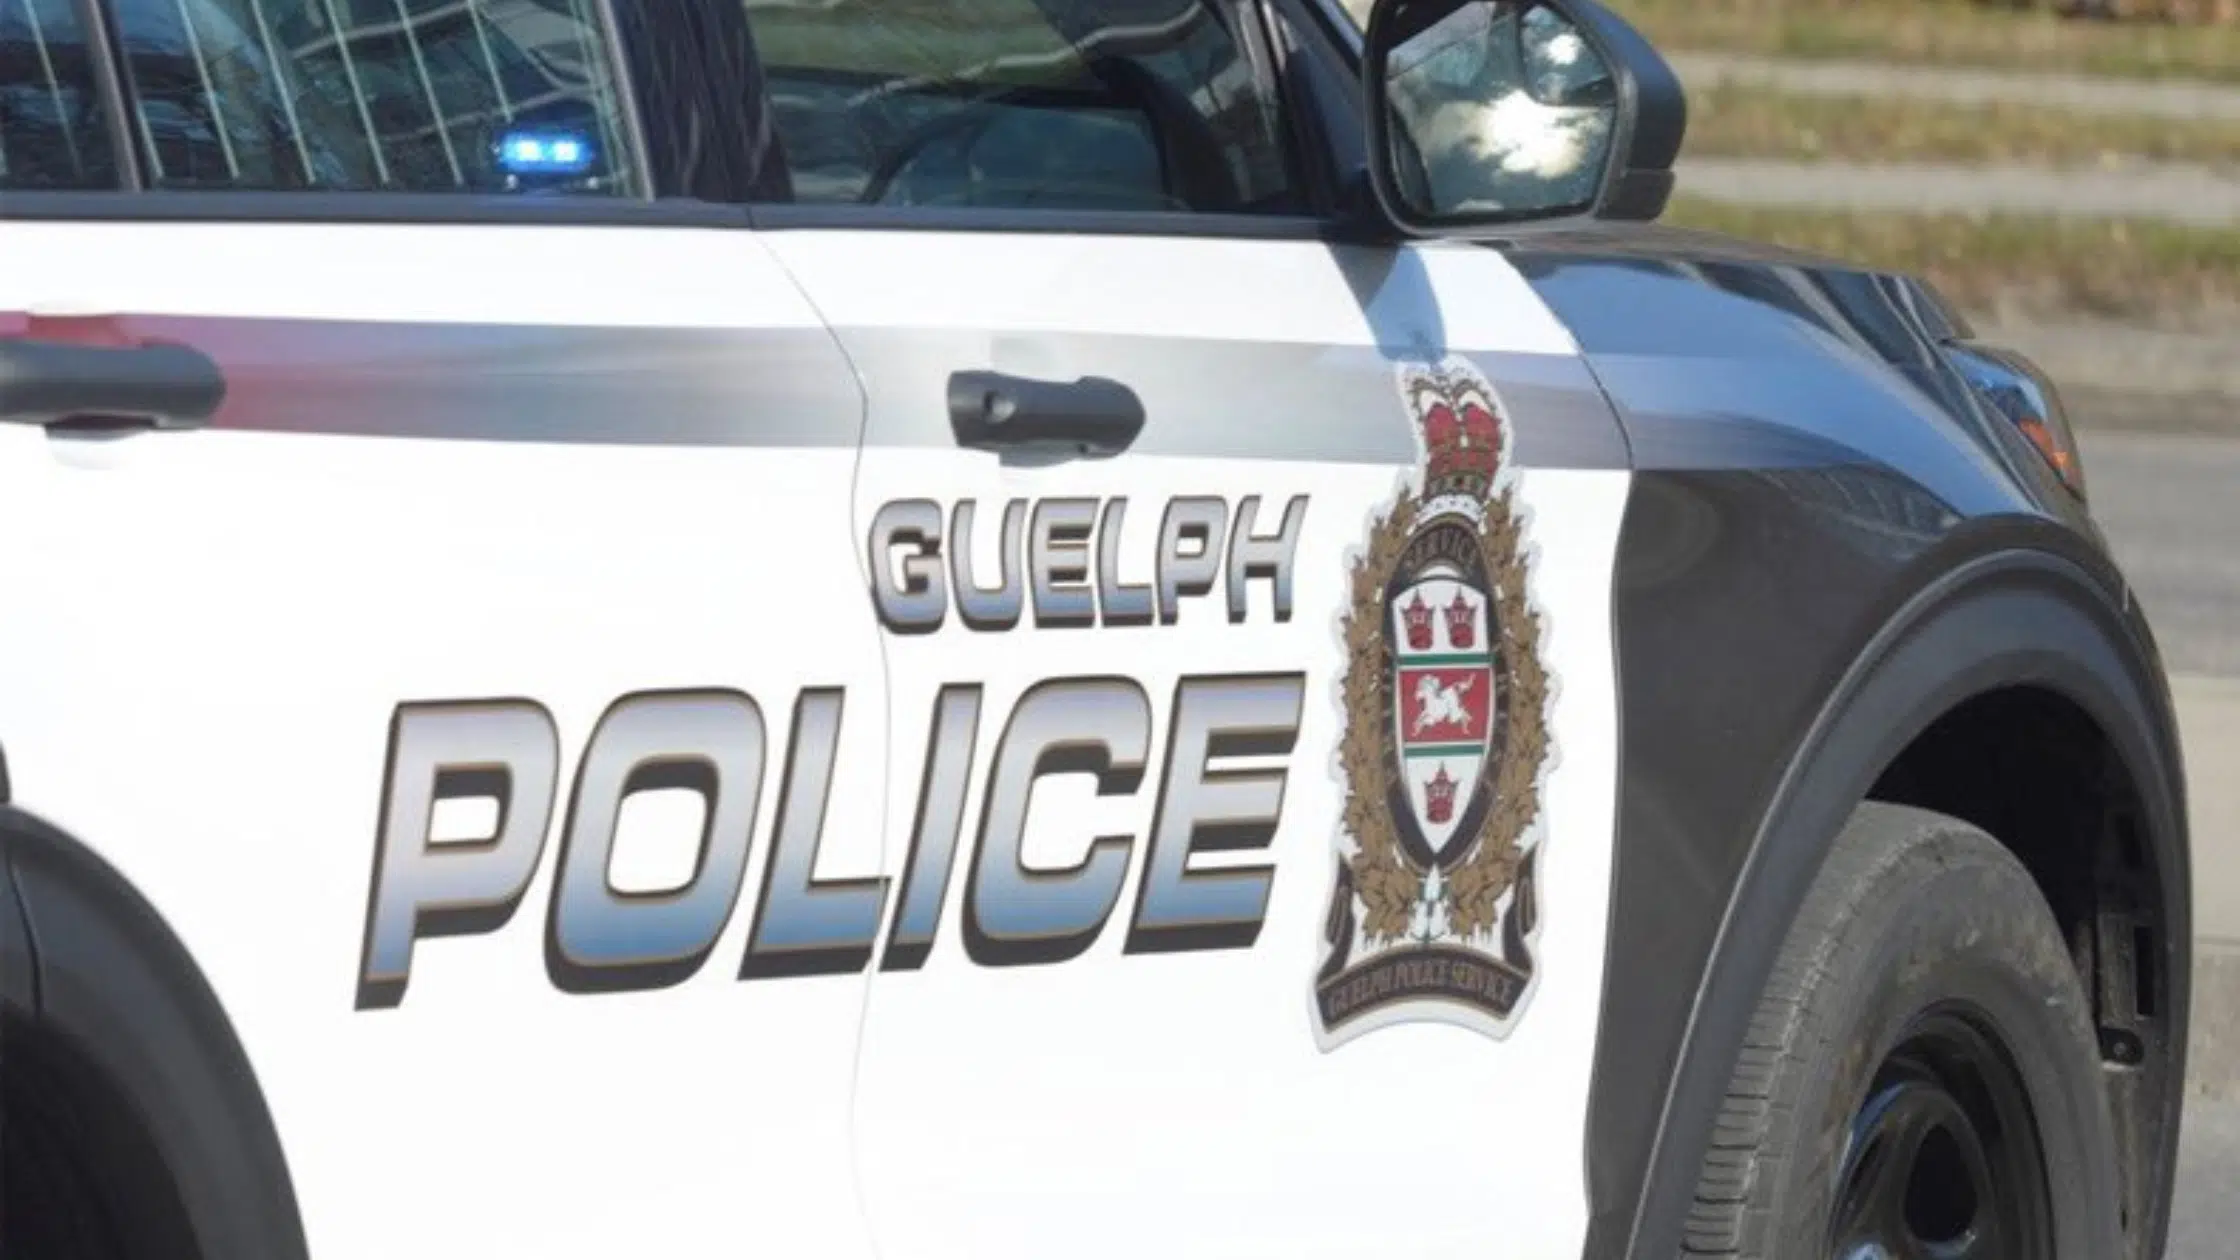 One Person Dead, Another Seriously Injured After Crash in Guelph